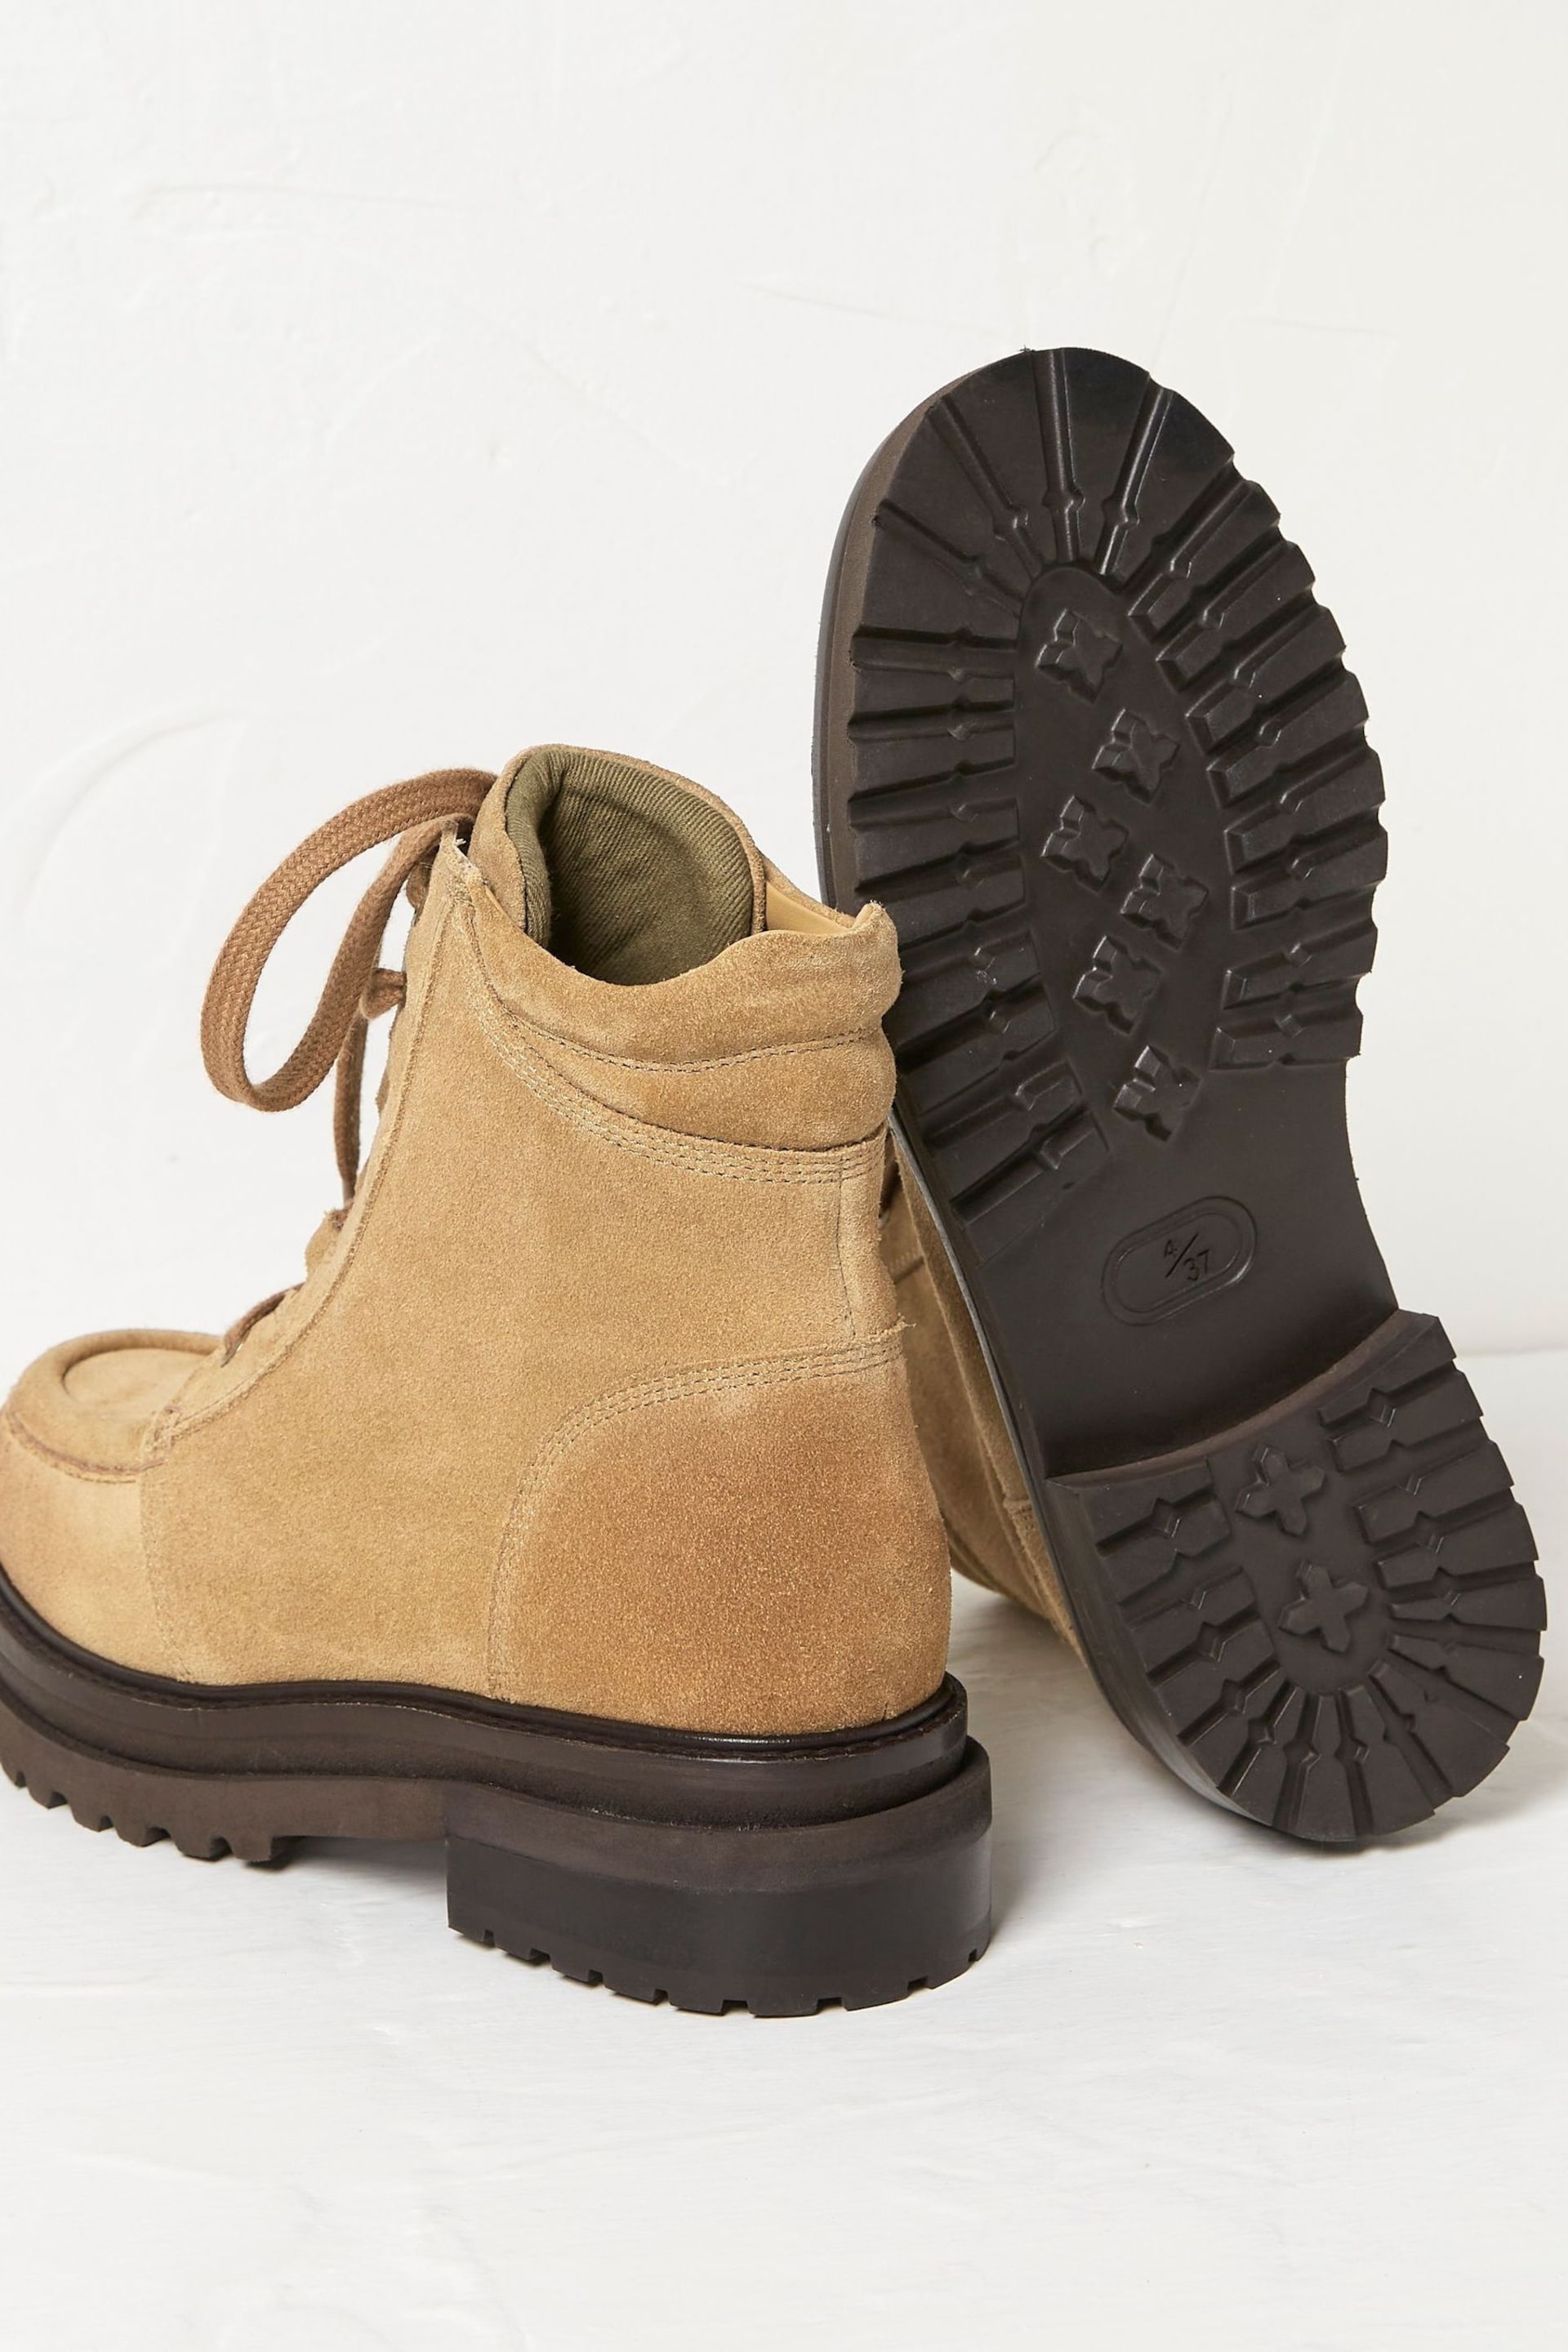 FatFace Brown Suede Apron Ankle Boots - Image 2 of 4